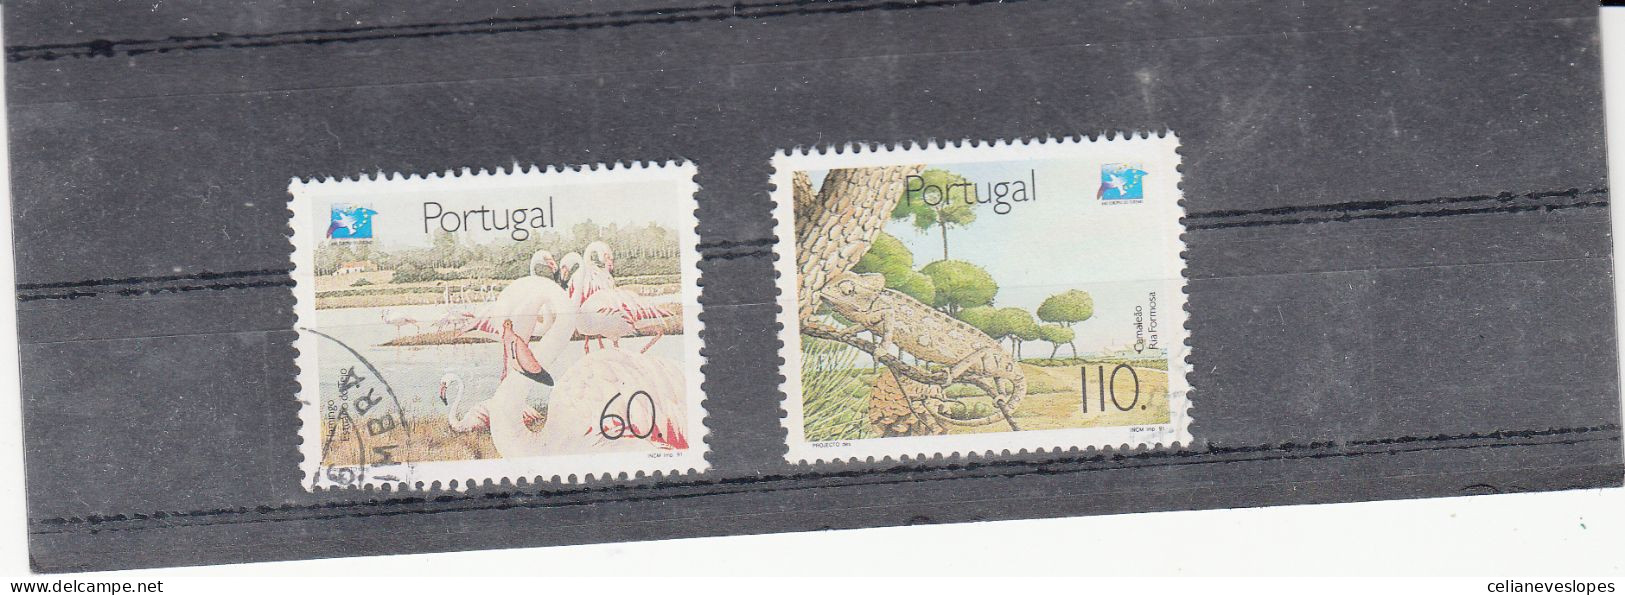 Portugal, Ano Europeu Do Turismo, 1991, Mundifil Nº 1993 A 1994 Used - Used Stamps